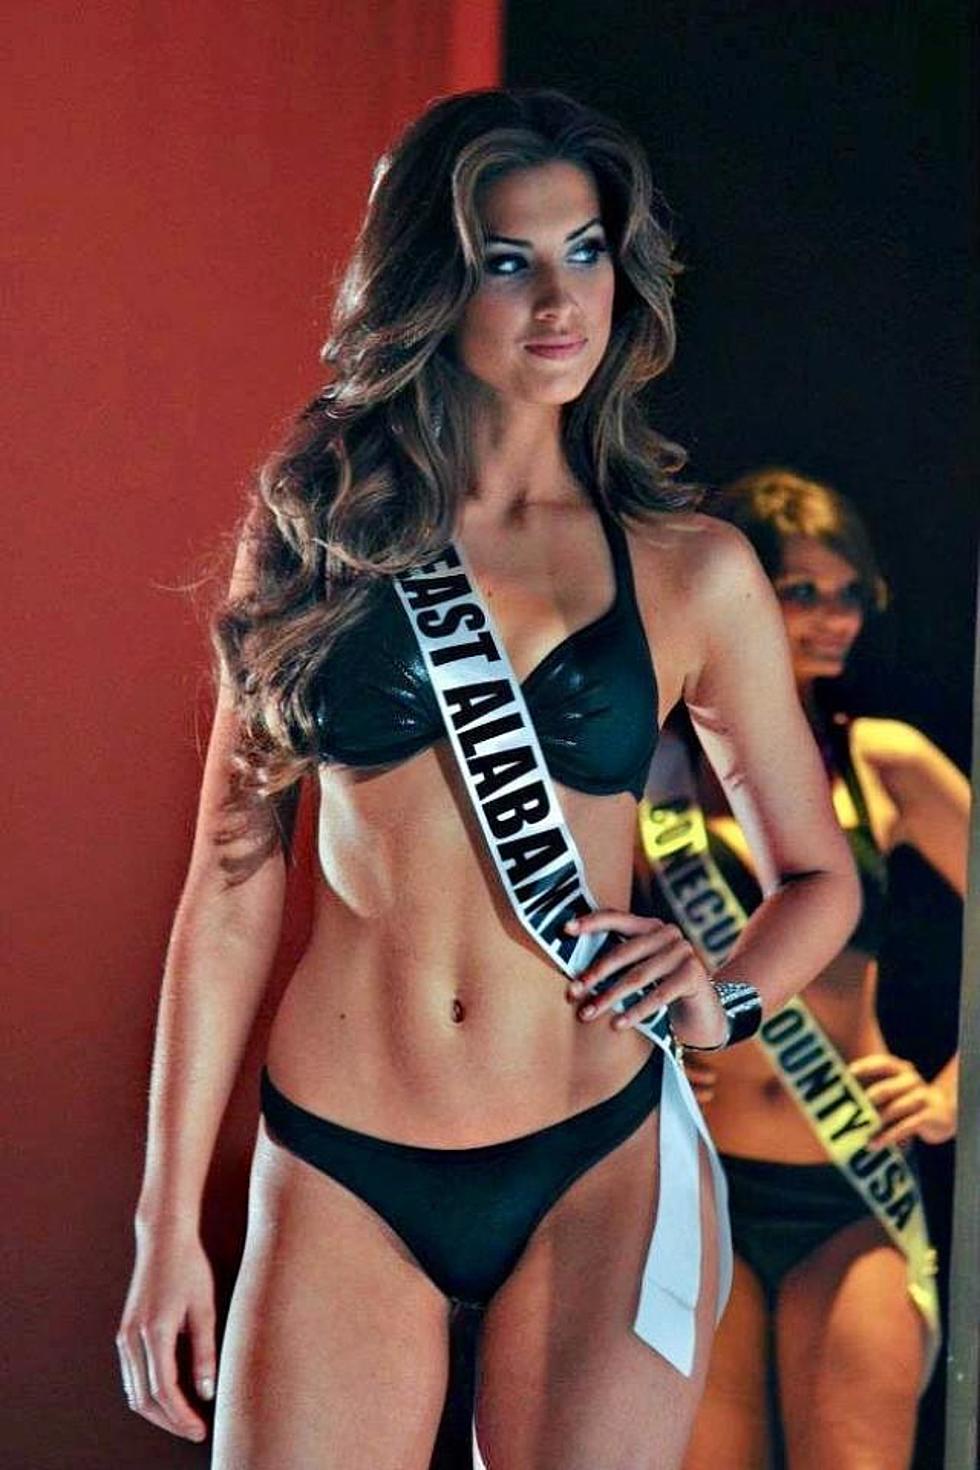 Can’t Miss Alabama: Katherine Webb Makes Sports Illustrated Swimsuit Issue [VIDEO]